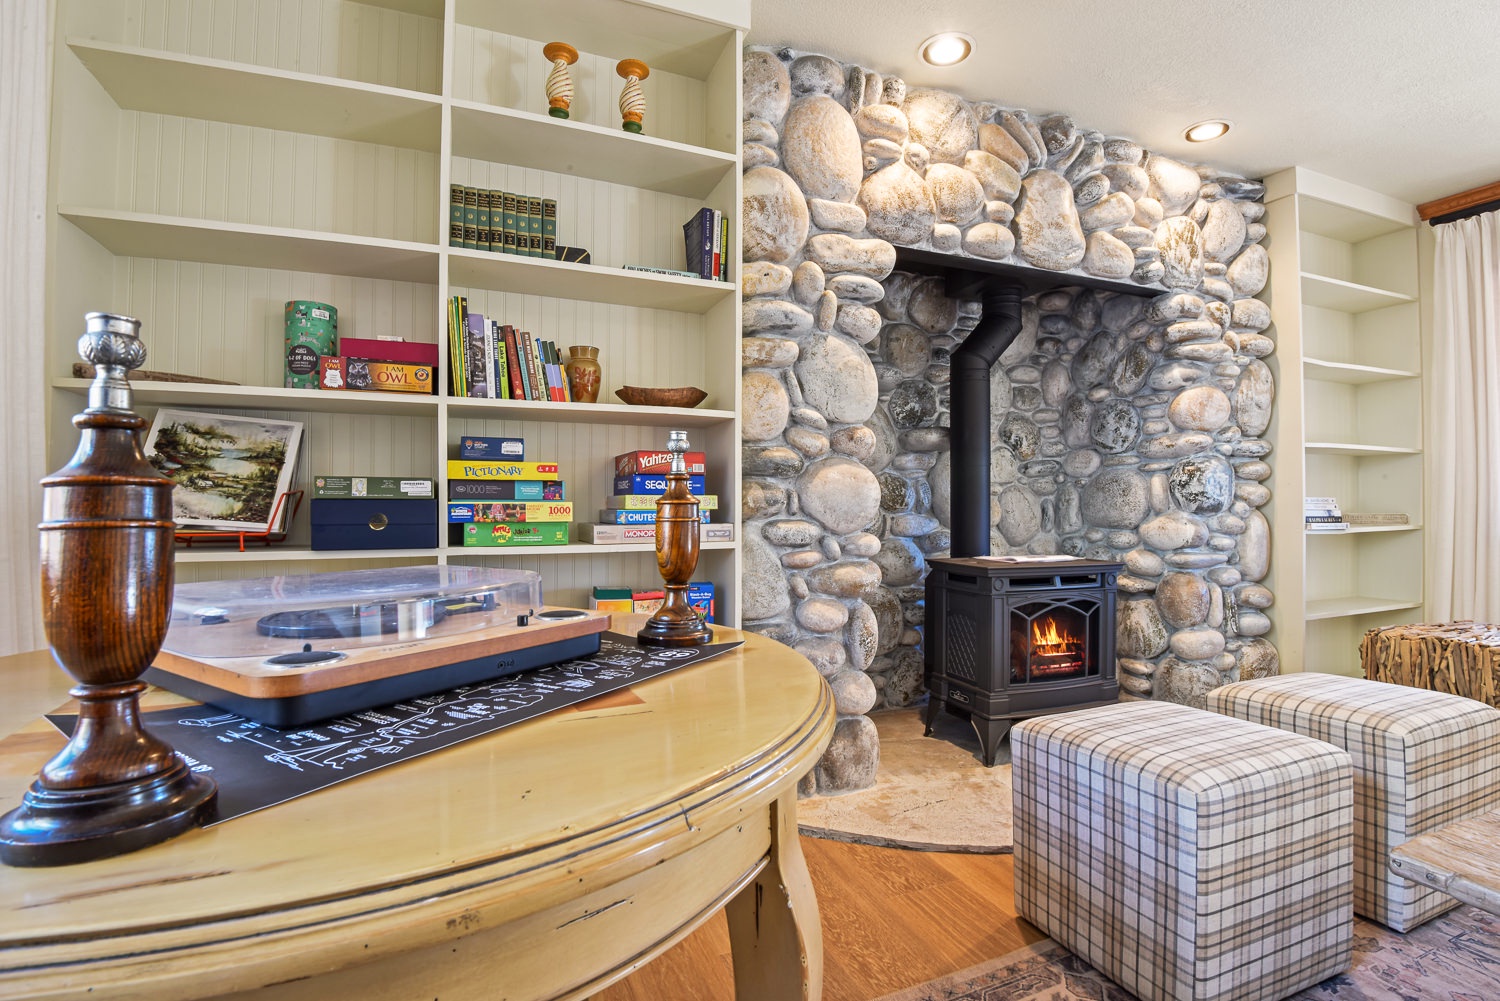 Game room featuring a chess table, a collection of games, and a cozy gas fireplace